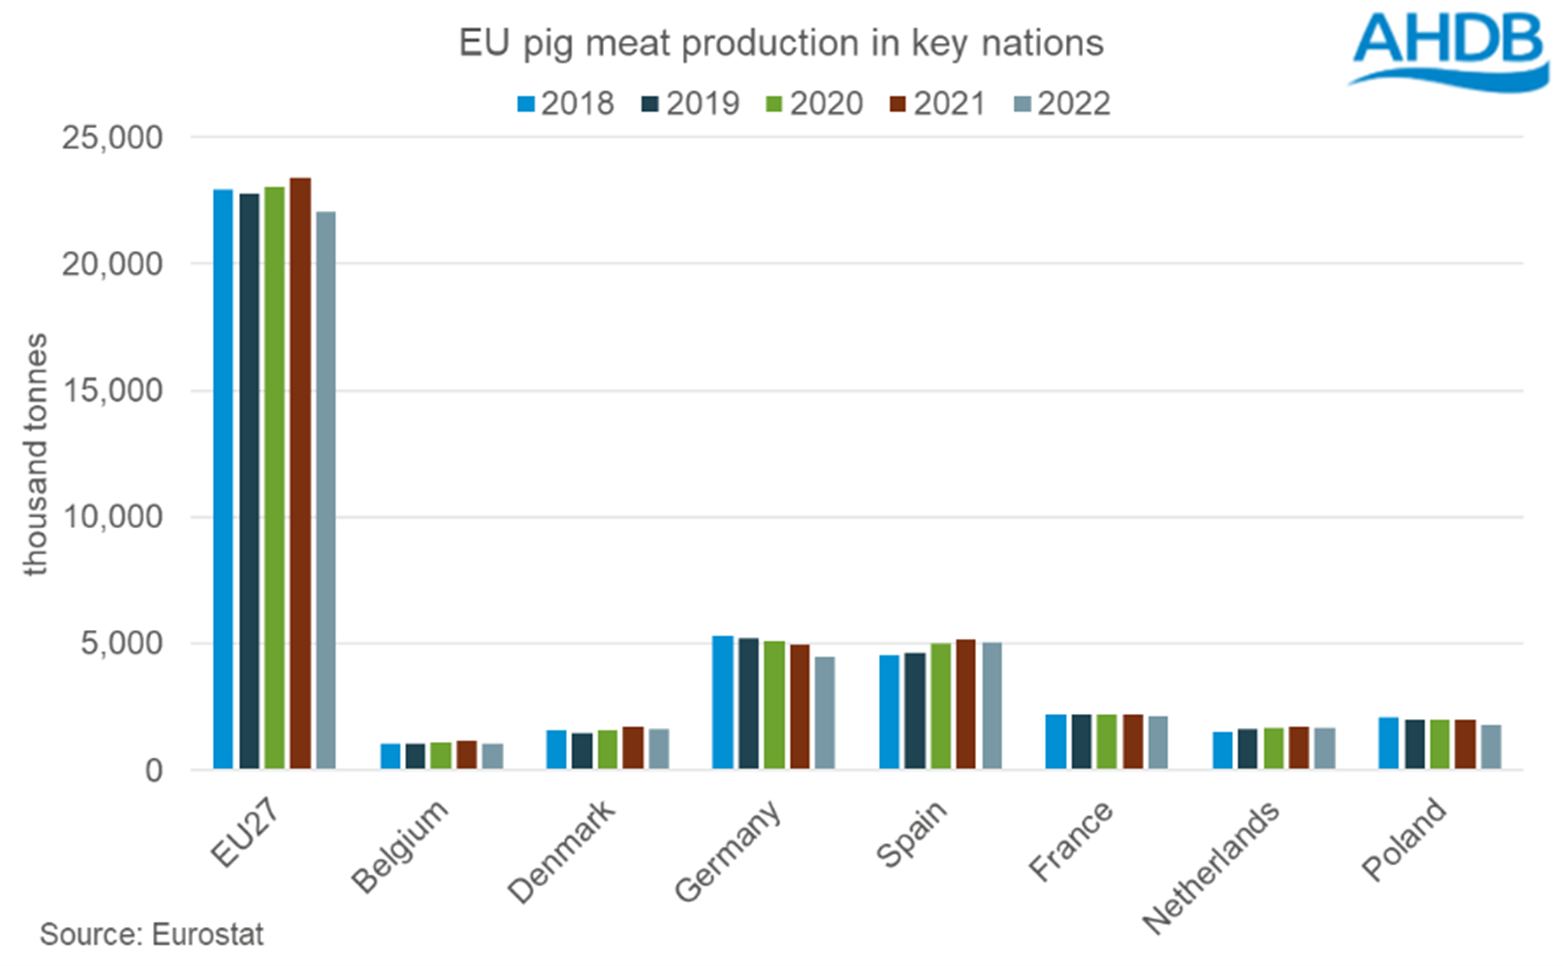 bar chart showing annual volumes of pig meat produced in key EU nations